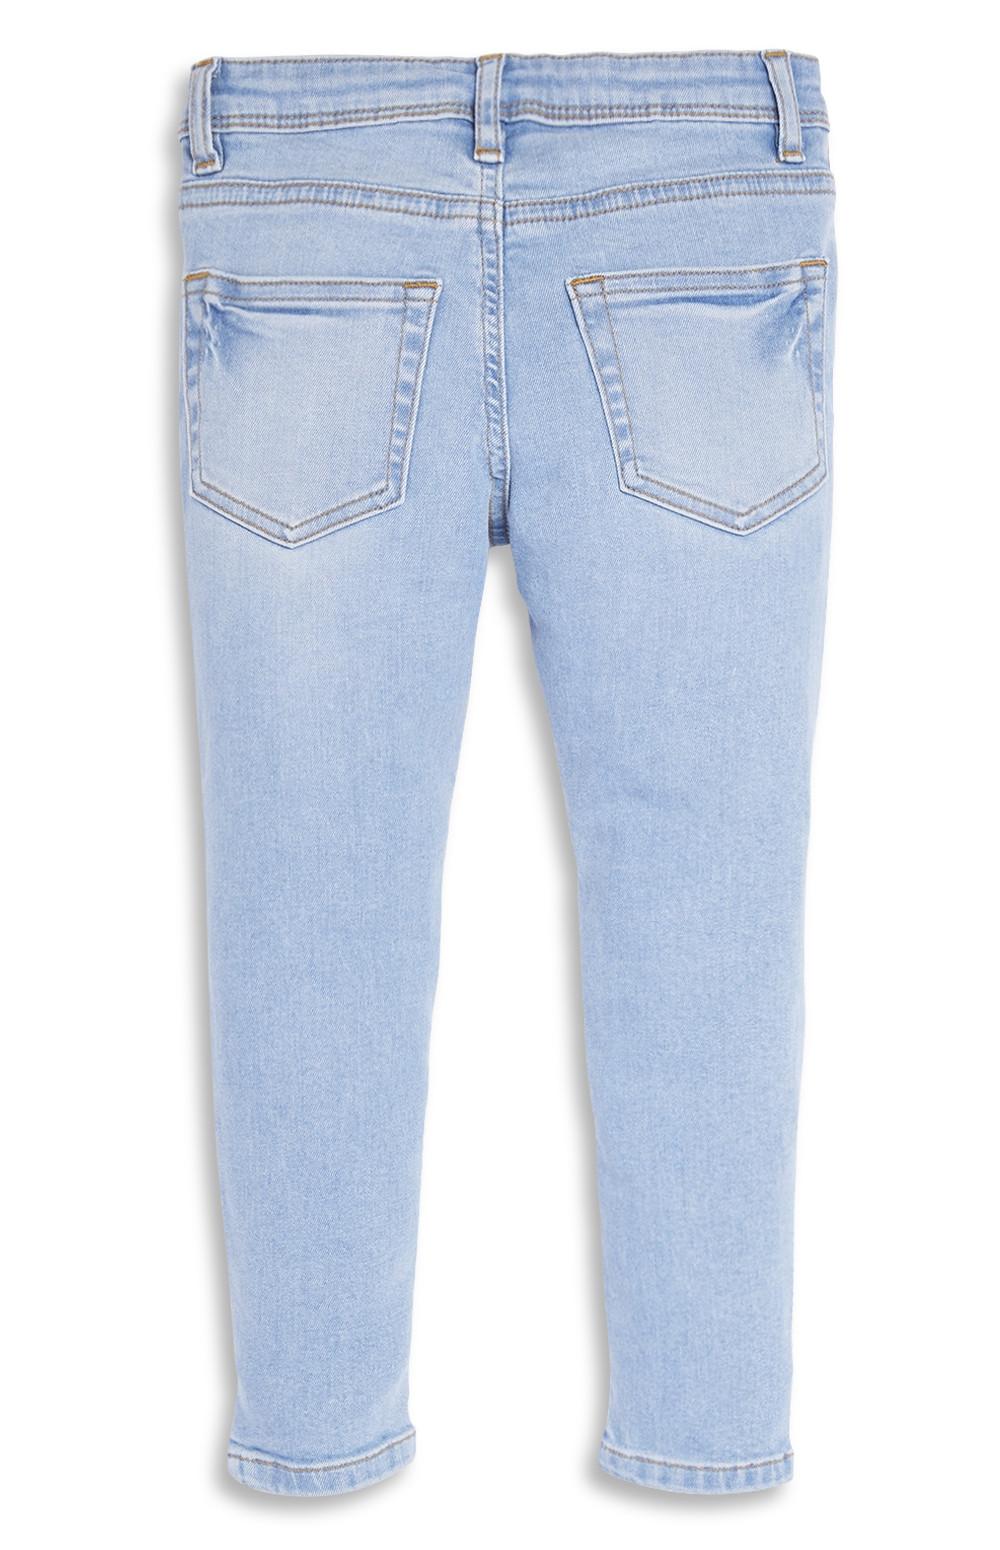 next younger boys jeans